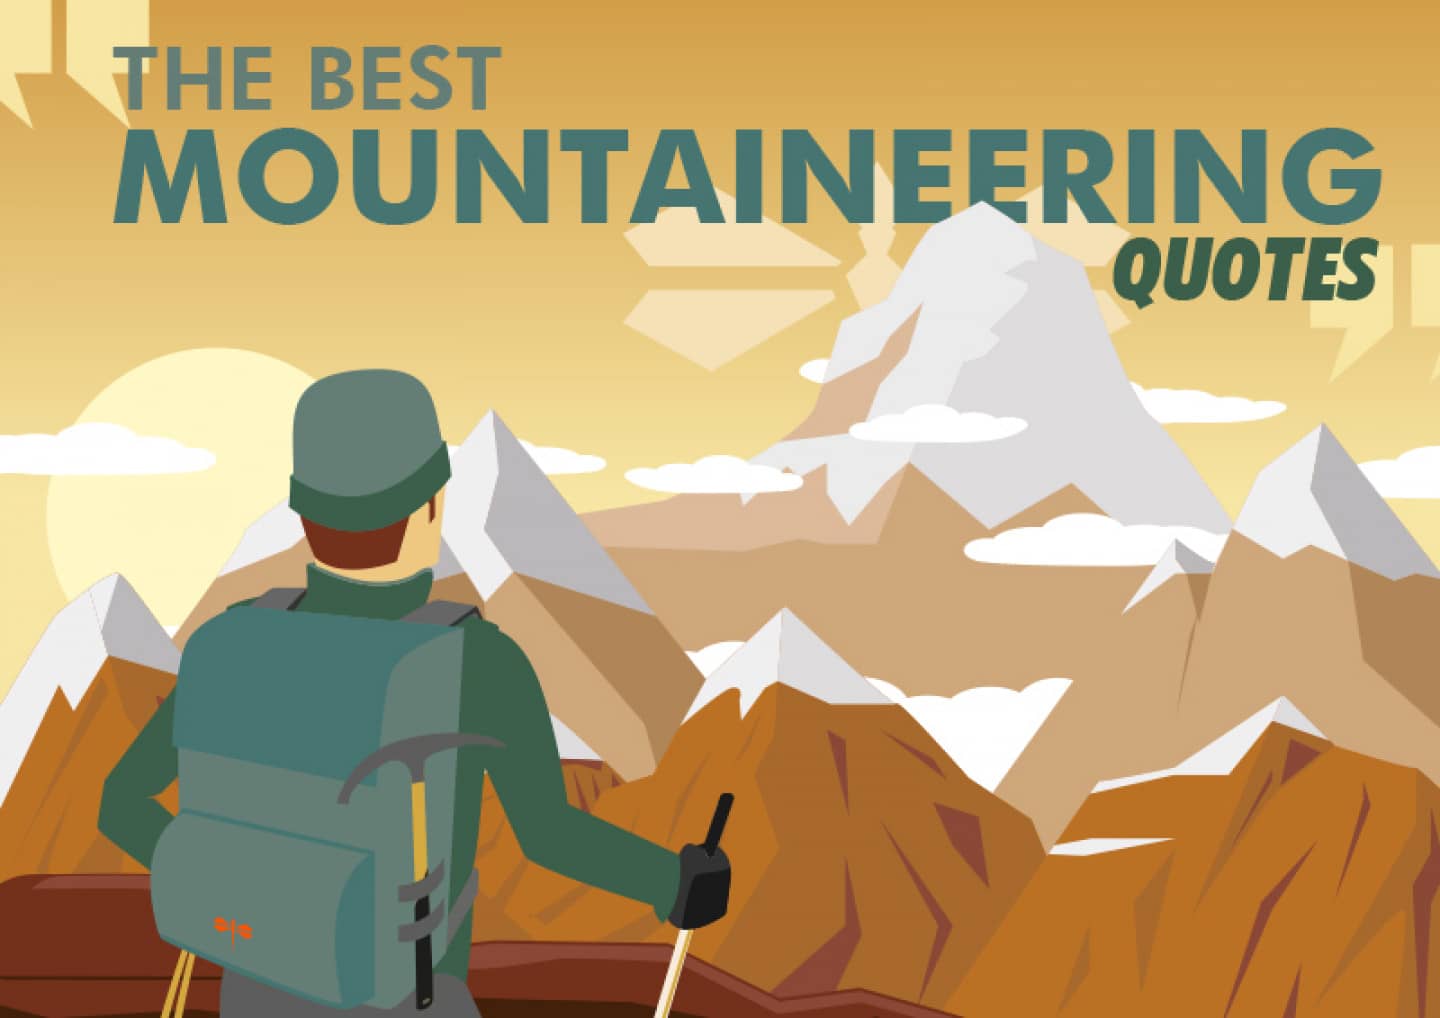 mountaineering quotes featured picture